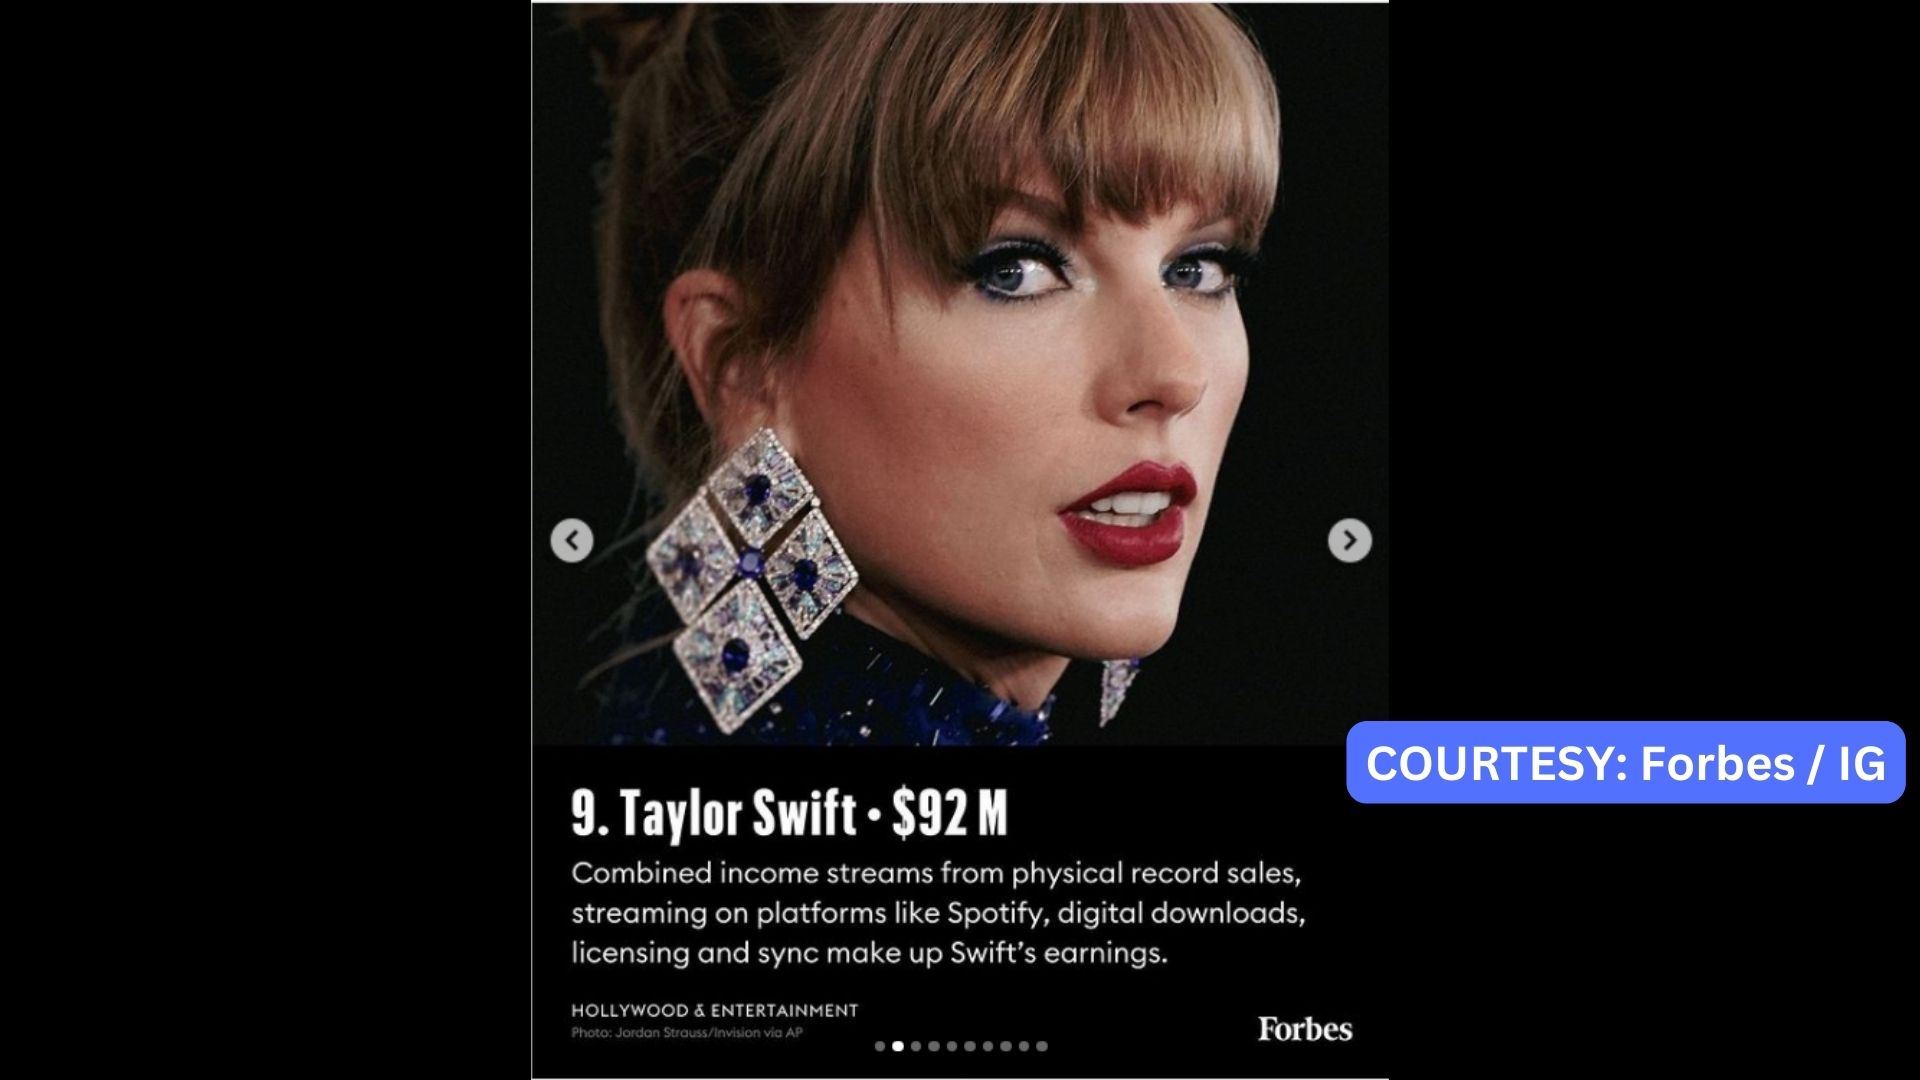 Taylor Swift “highest paid female entertainer” ayon sa ForbesTaylor Swift “highest paid female entertainer” ayon sa Forbes